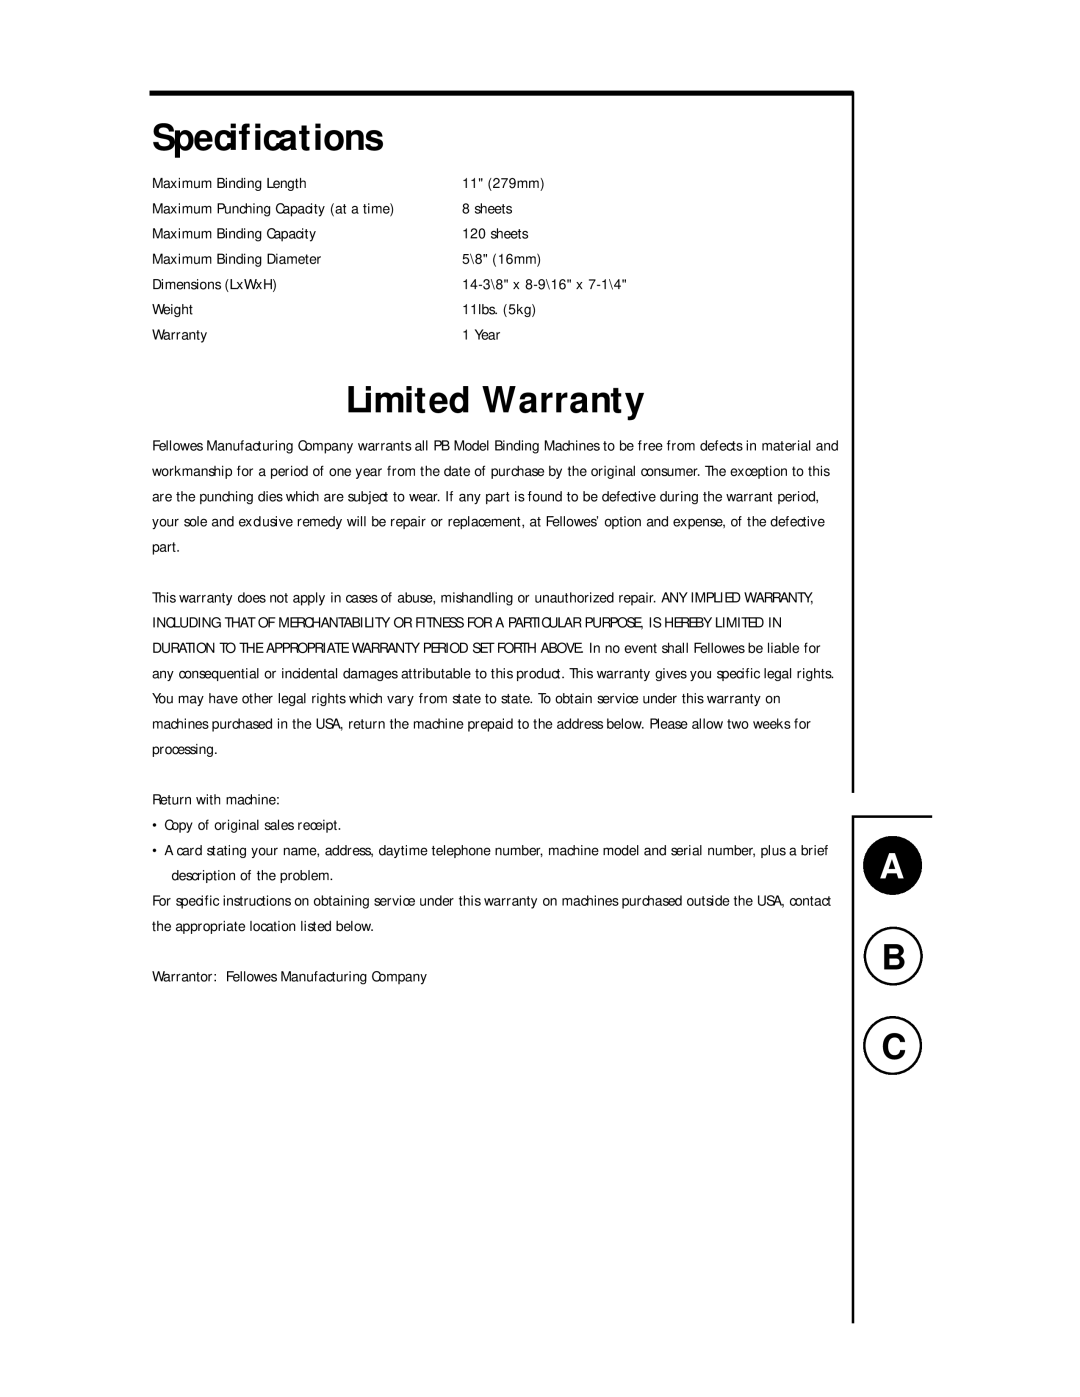 Fellowes WB 100 manual Specifications, Limited Warranty 